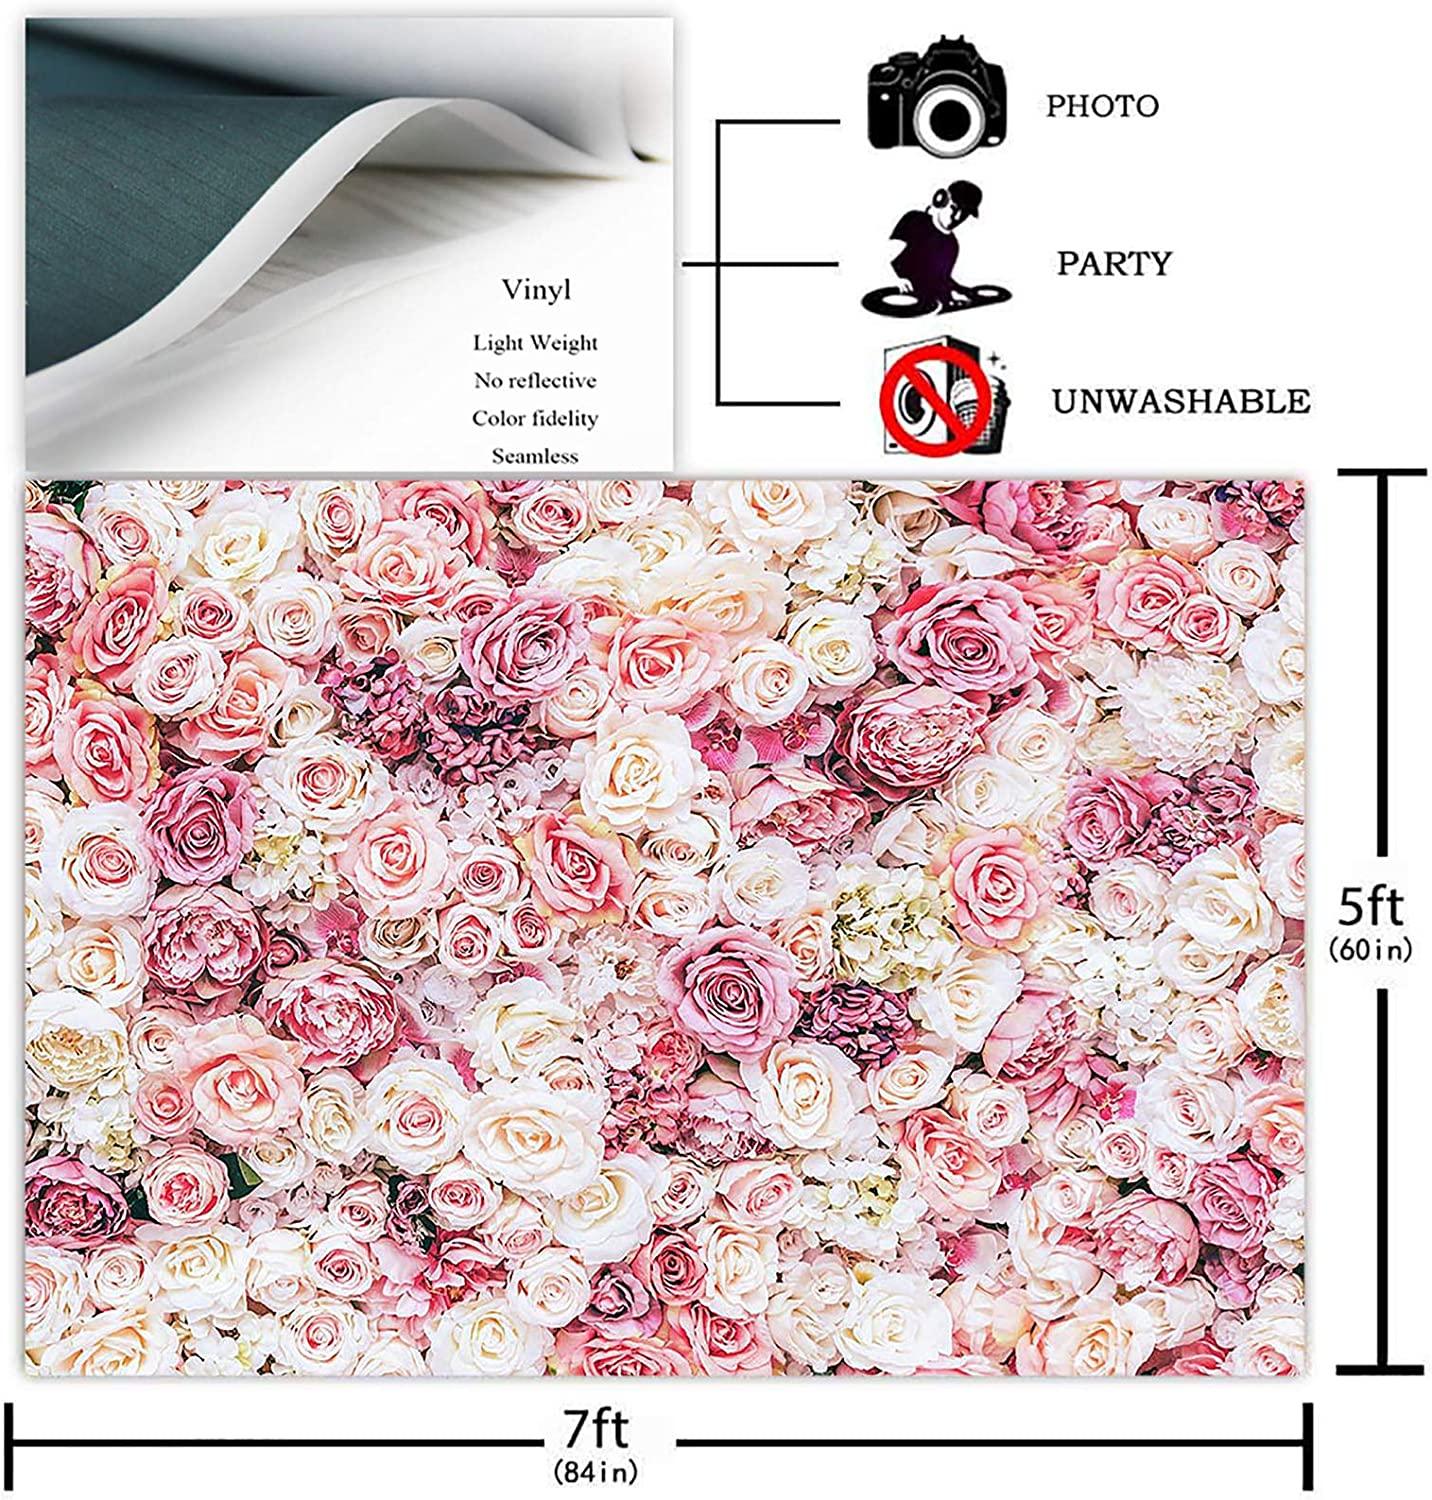 Floral Backdrop for Parties Photoshoot Pink Rose Flowers Wedding Birthday Party Photography Background - Decotree.co Online Shop